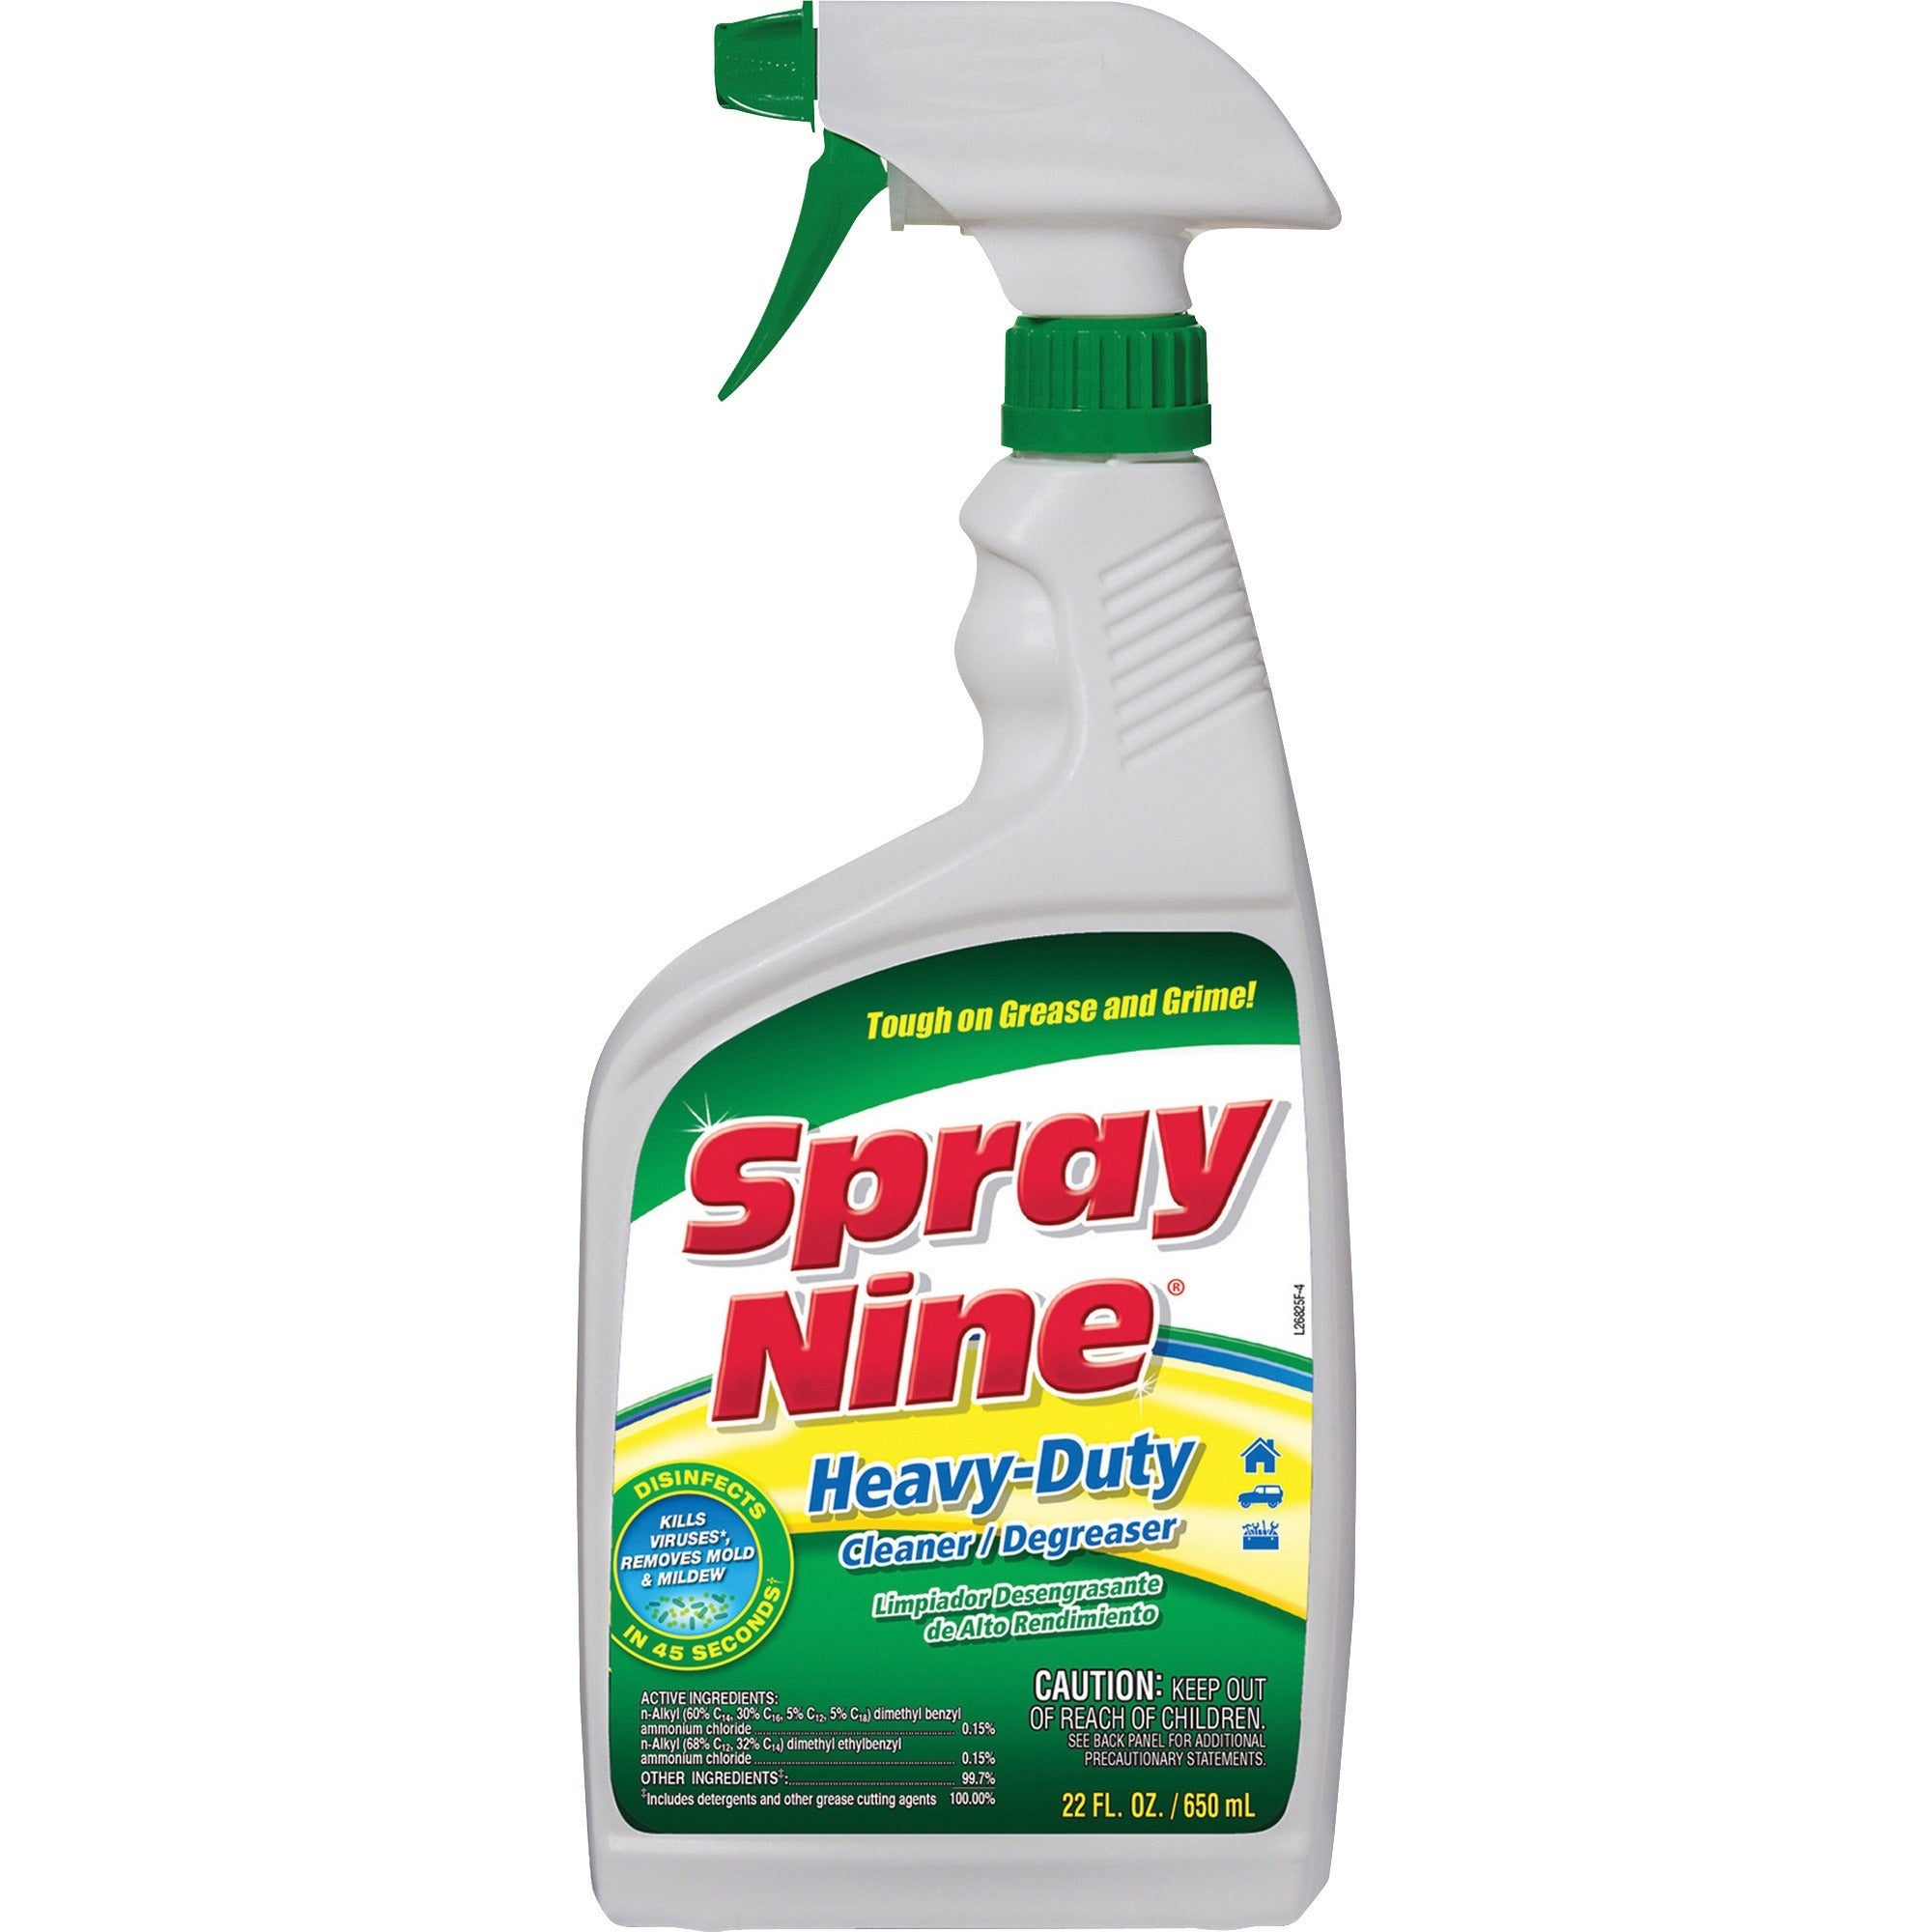 spray-nine-heavy-duty-cleaner-degreaser-w-disinfectant-for-multi-surface-22-fl-oz-07-quartbottle-12-carton-disinfectant-clear_ptx26825ct - 2